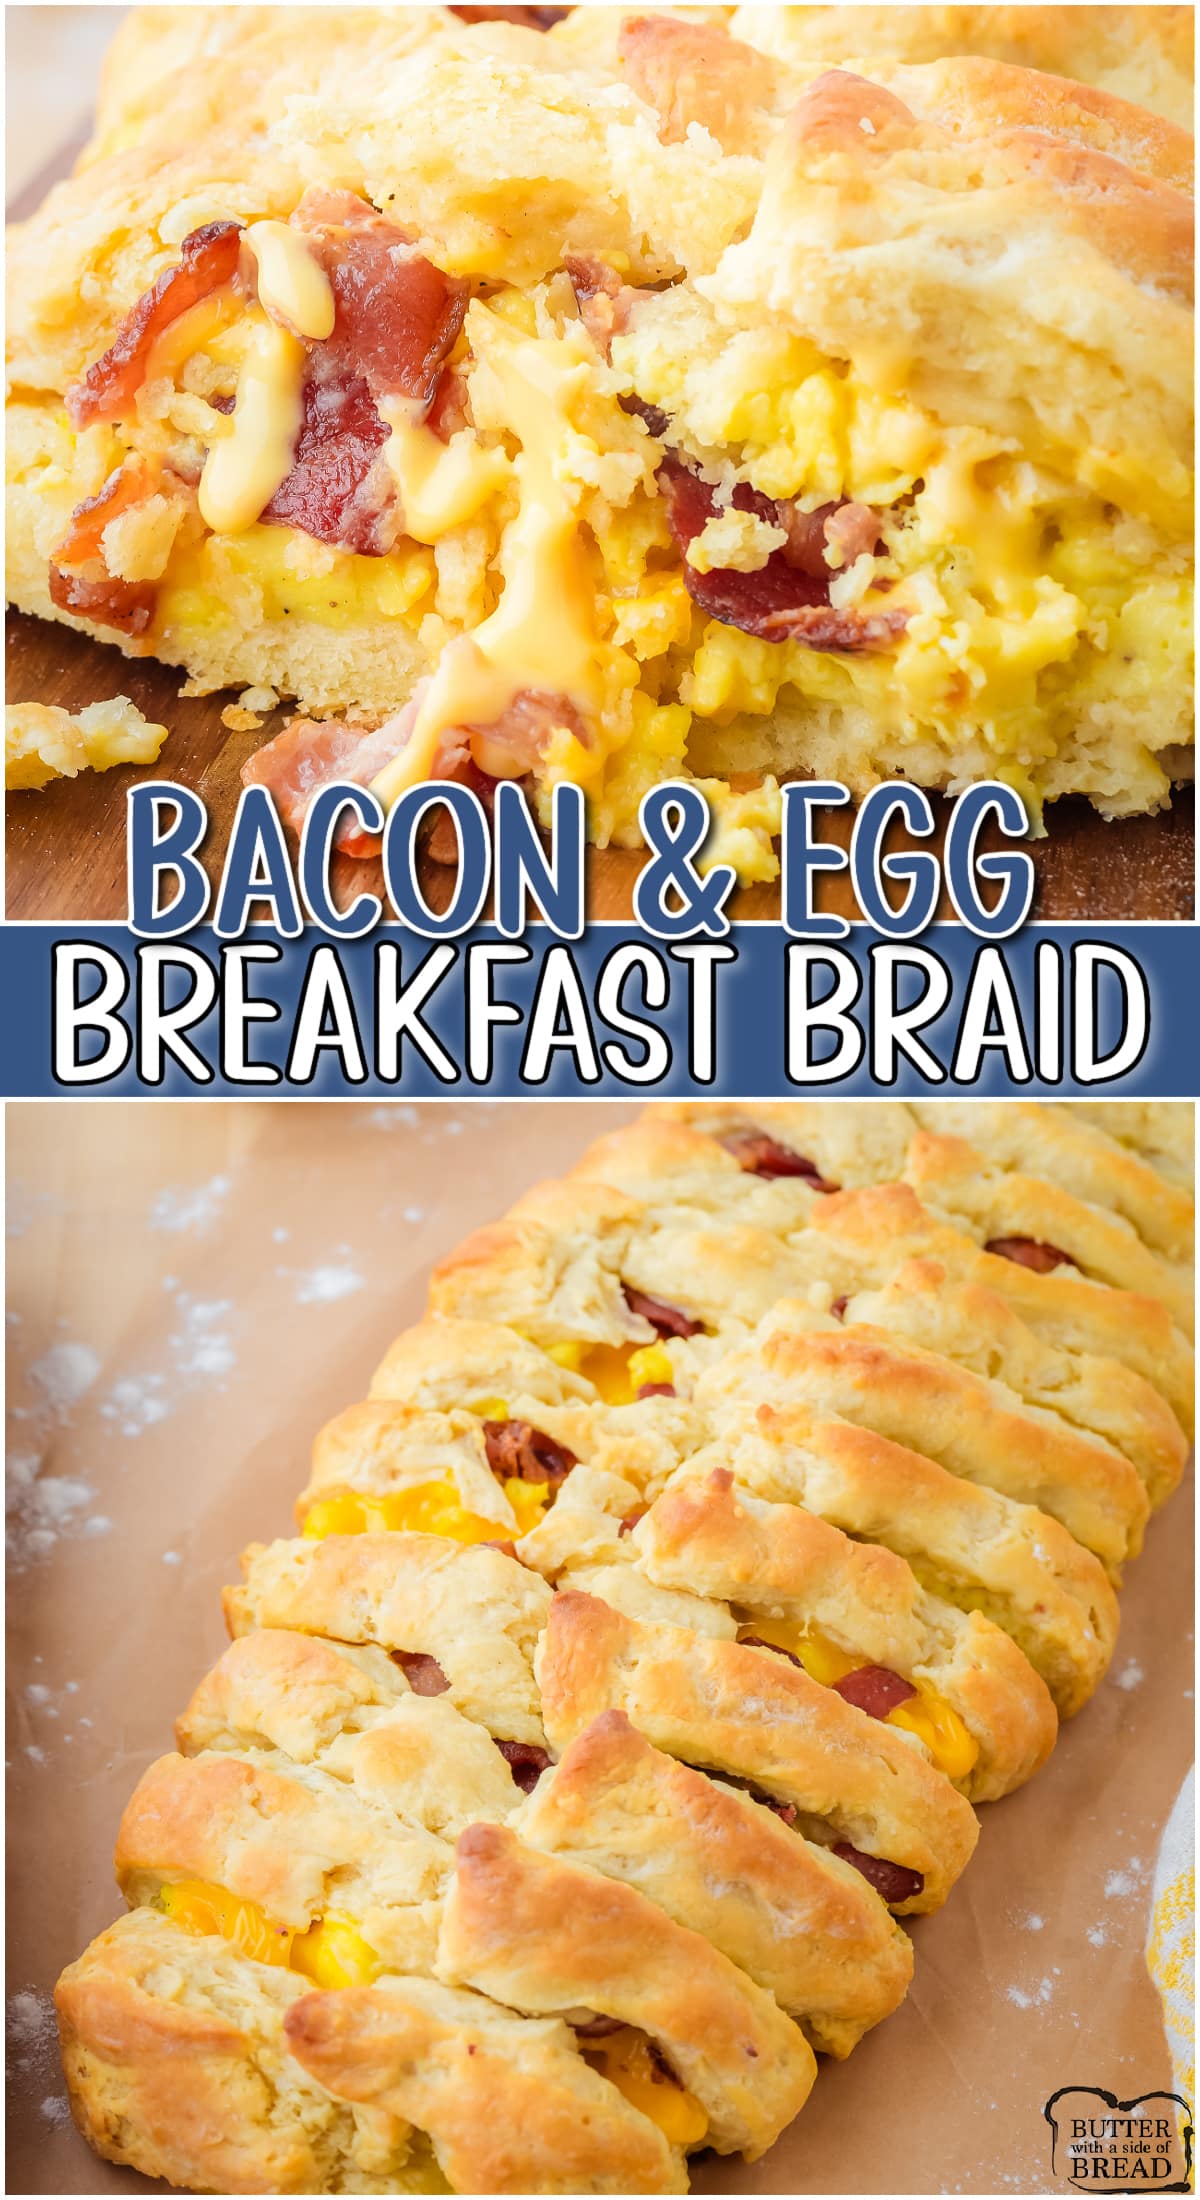 Breakfast is elevated with this delightful Bacon Egg and Cheese Biscuit Braid! Simple ingredients come together fast in this savory twist on bacon, egg, and cheese!